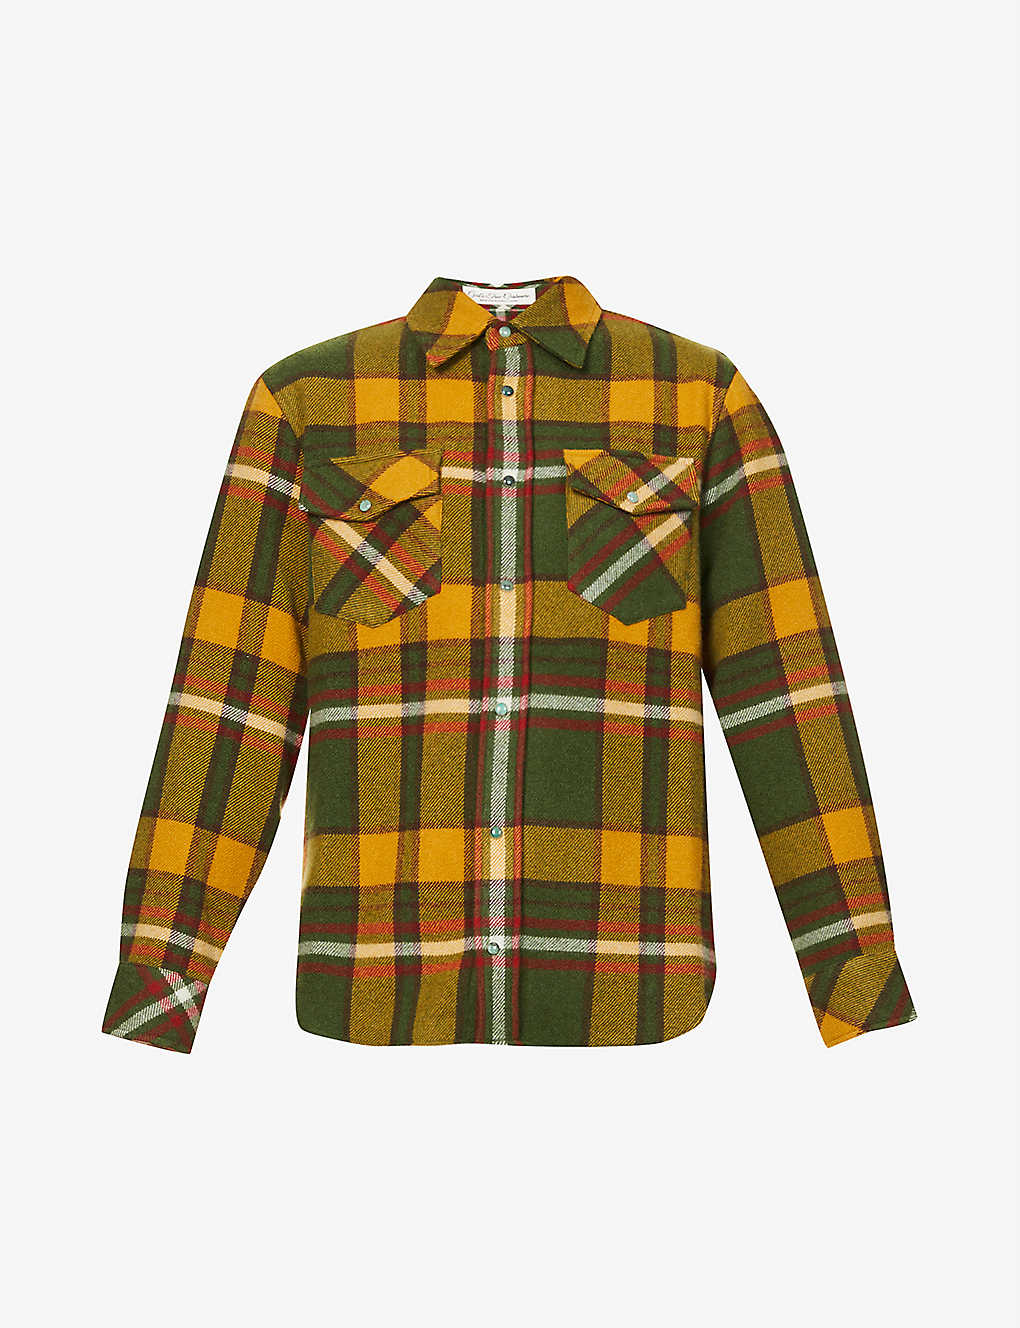 God's True Cashmere Unisex Emerald Checked Cashmere Shirt In Ft4hunter